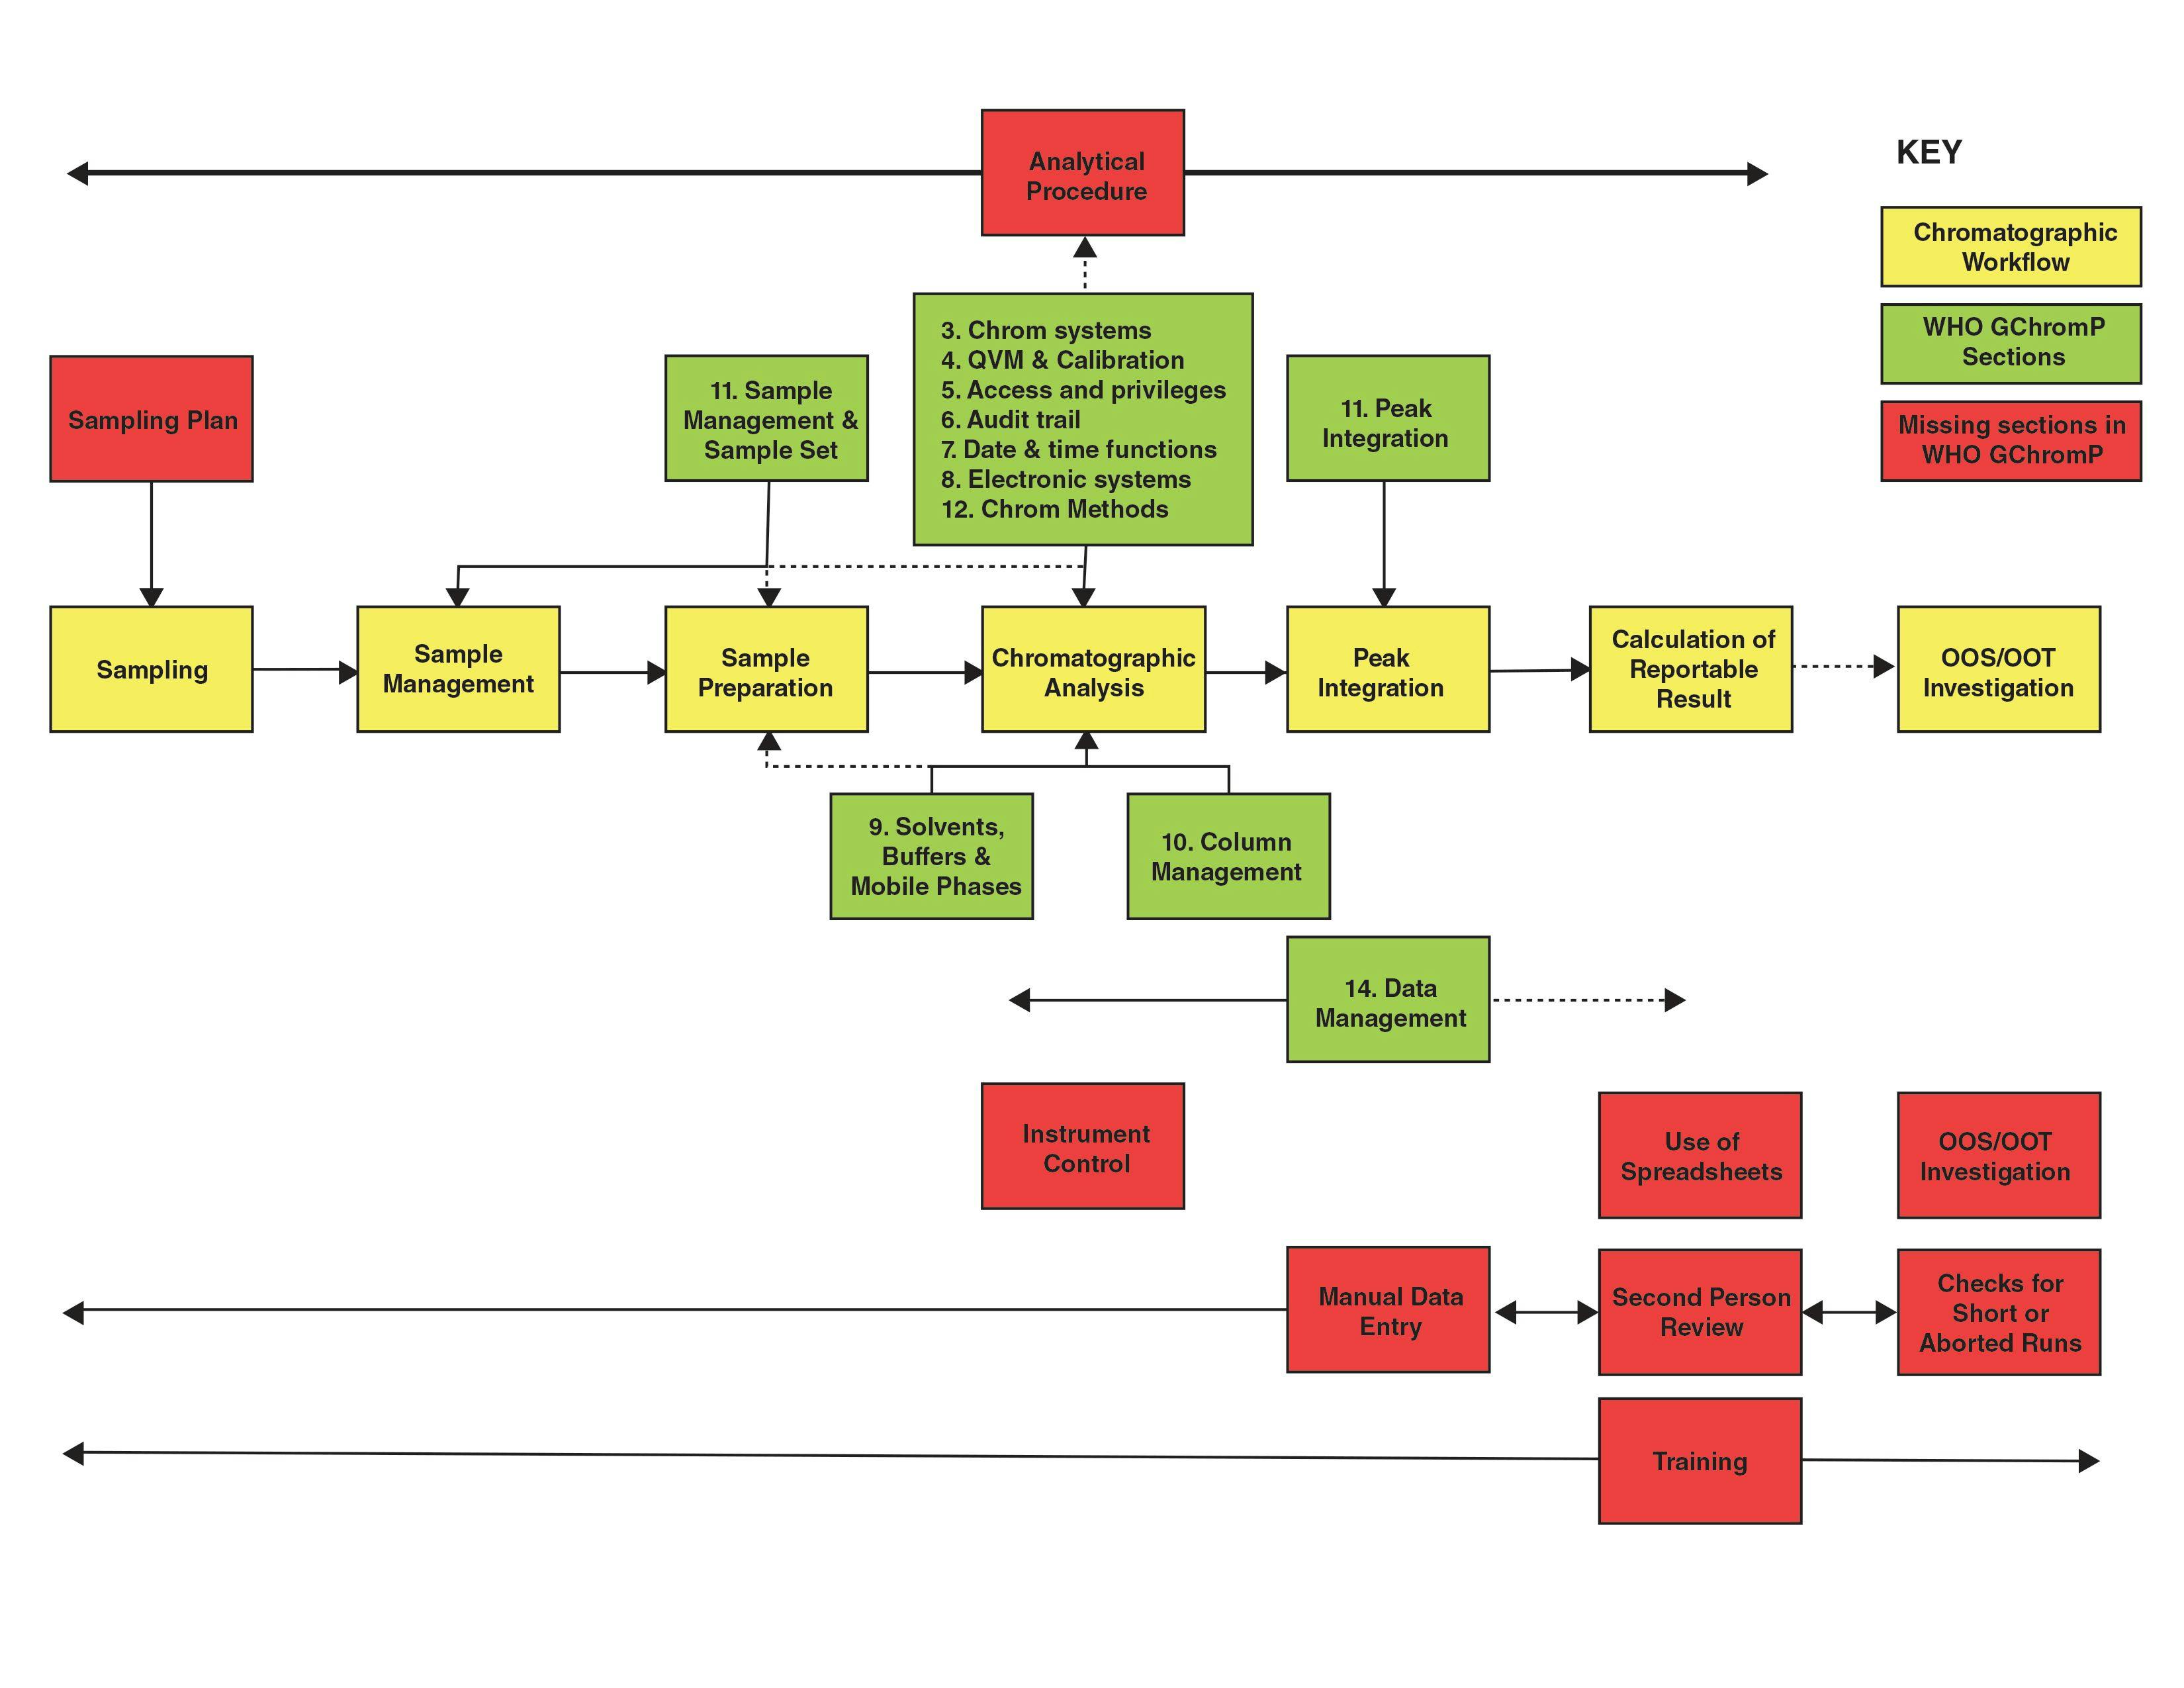 FIGURE 1: Mapping the WHO Guidance on Good Chromatography Practices to an Analytical Process.